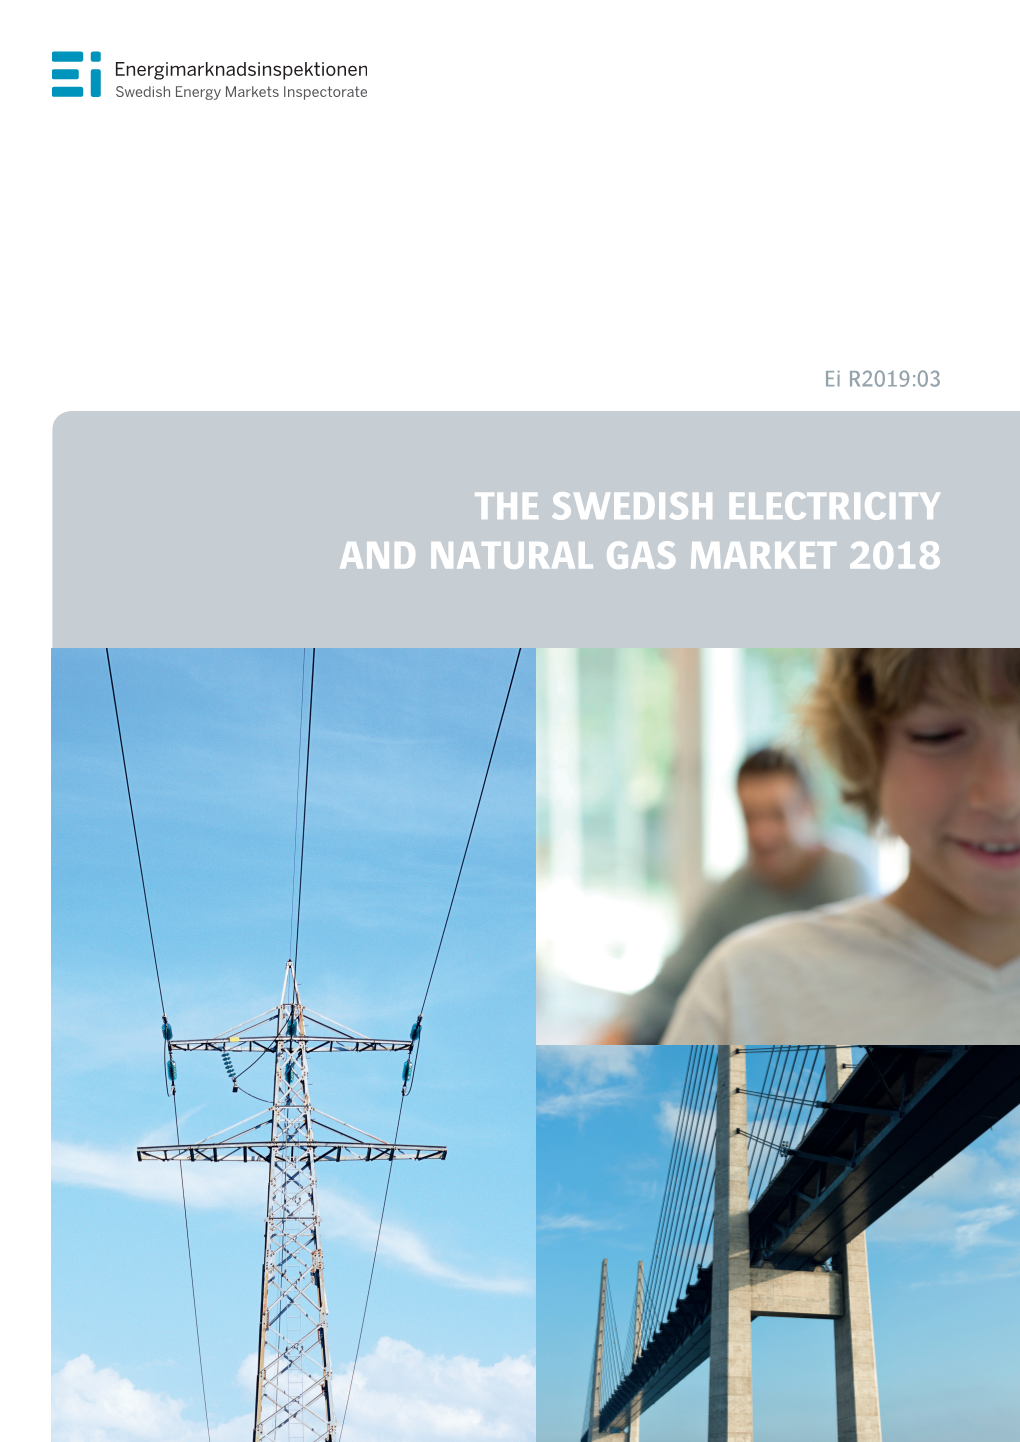 The Swedish Electricity and Natural Gas Market 2018